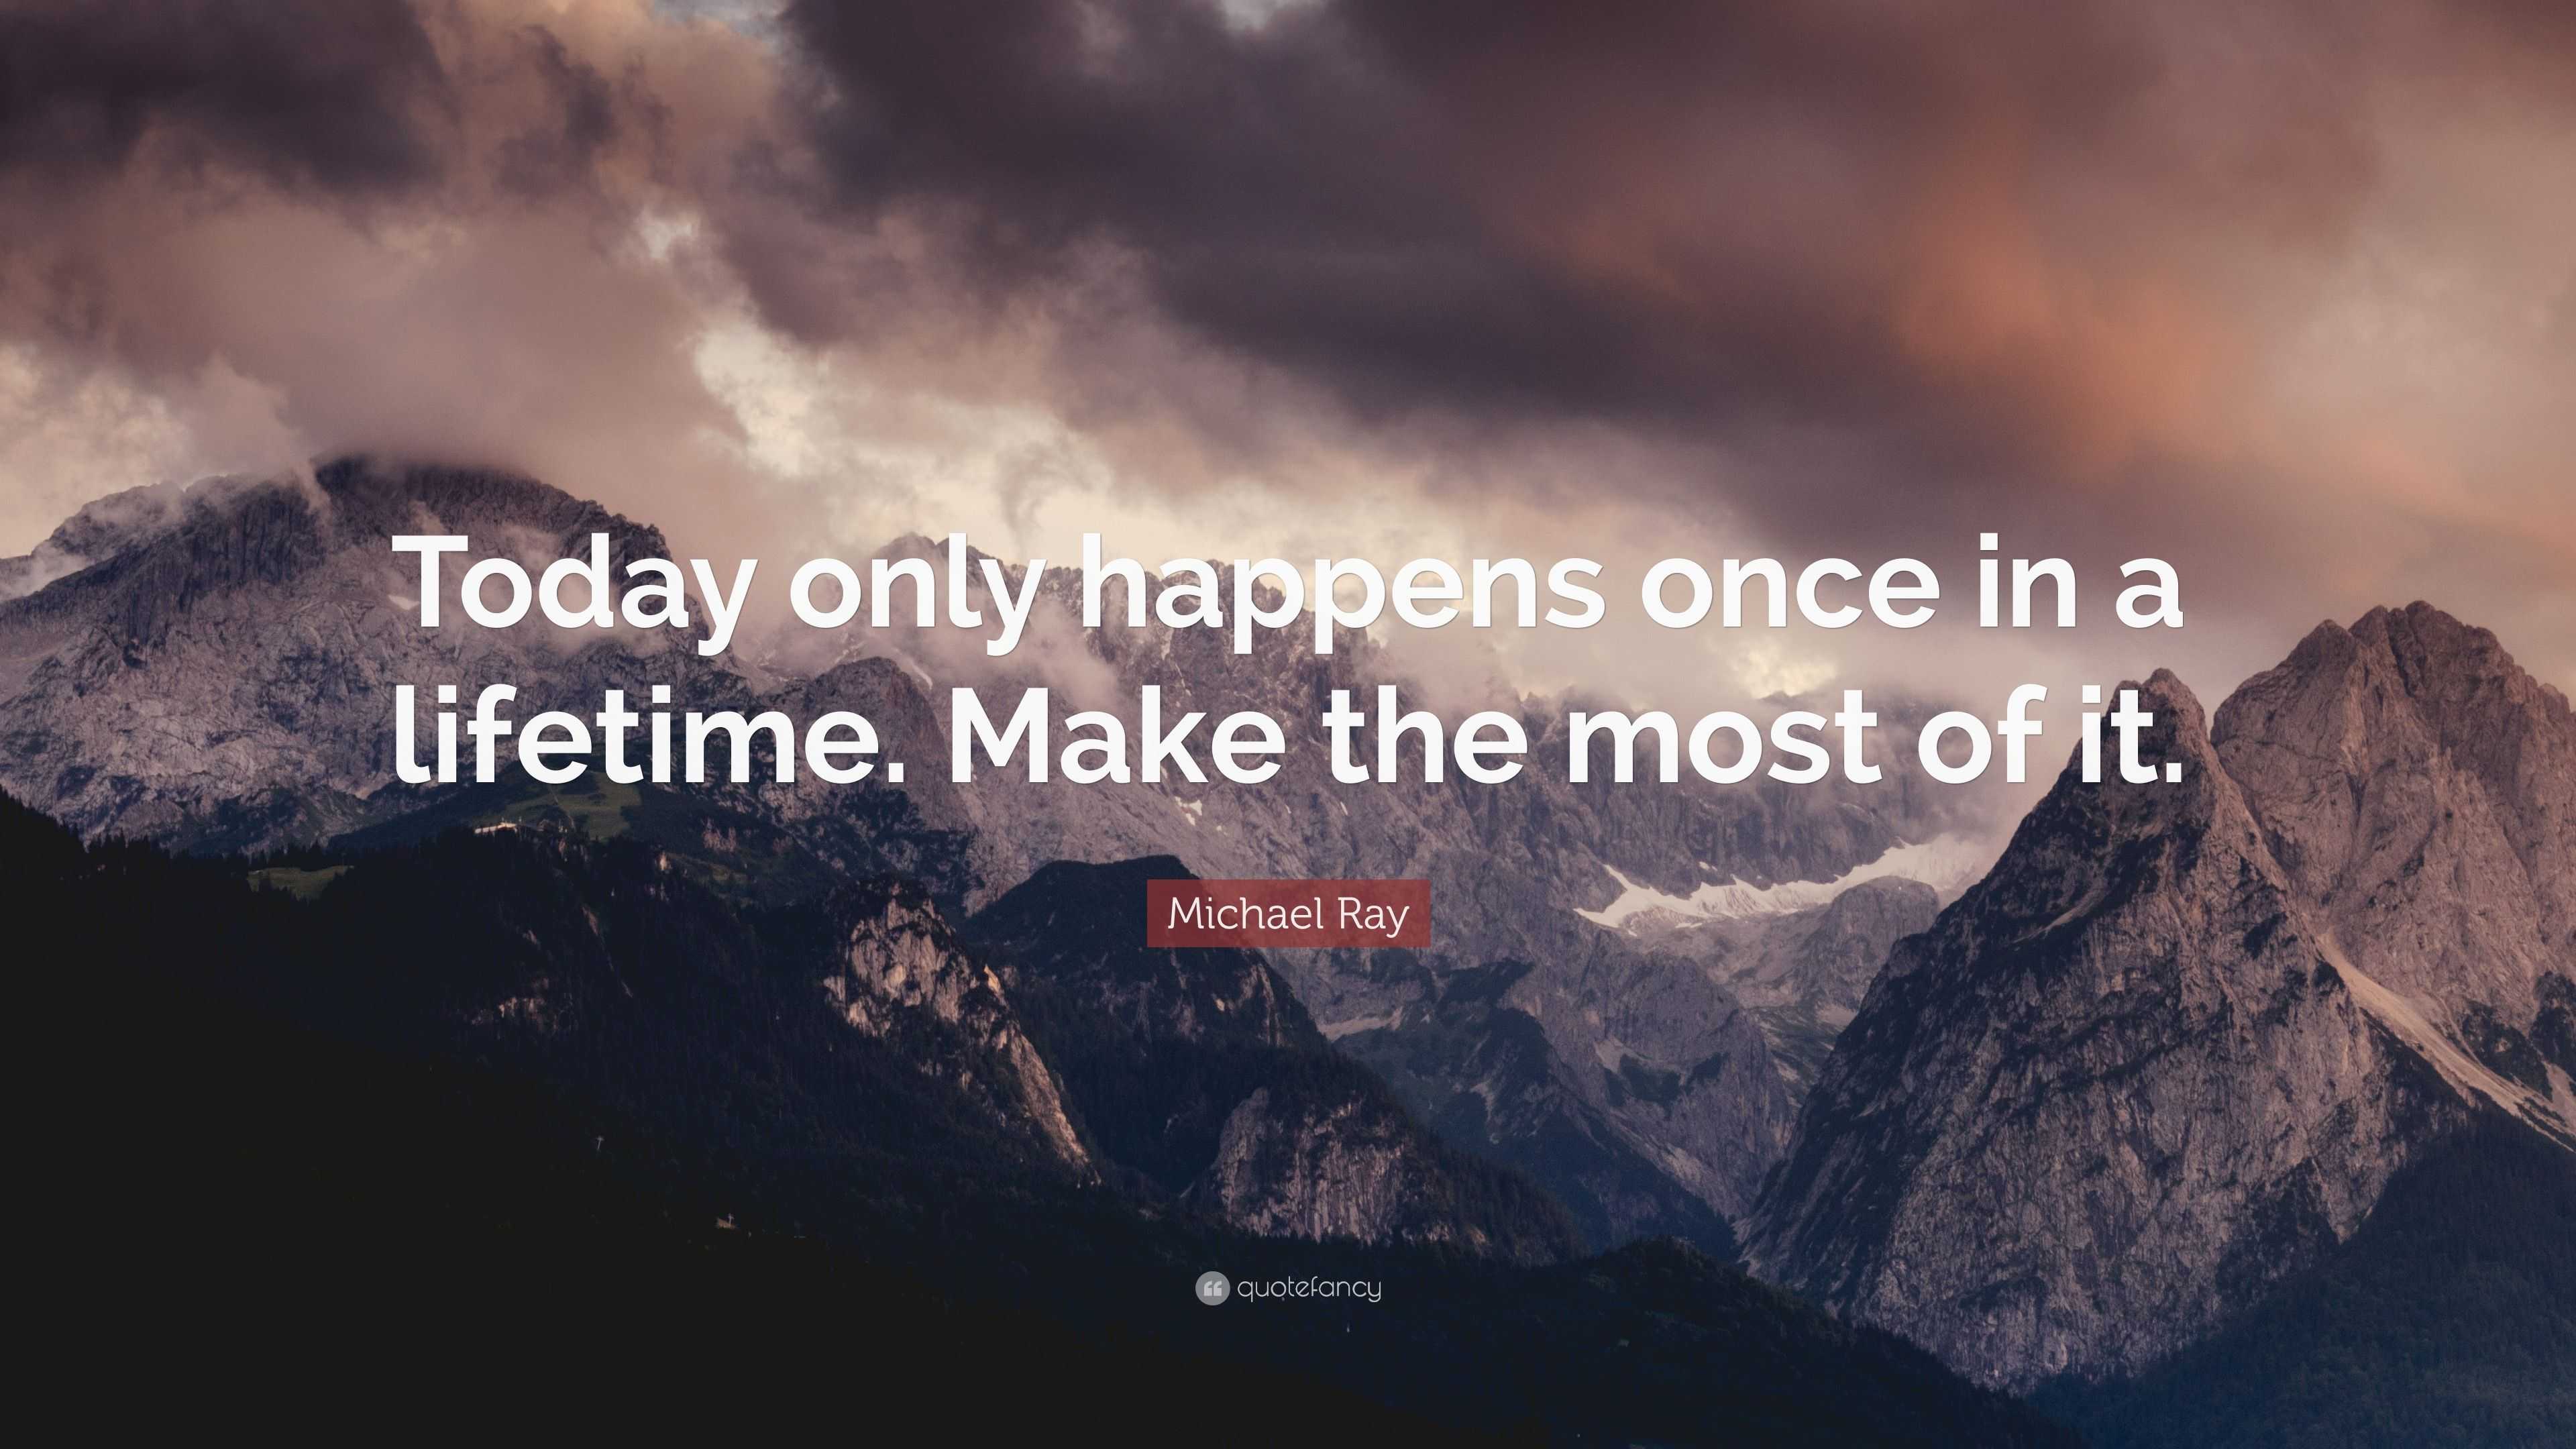 Michael Ray Quote: “Today only happens once in a lifetime. Make the